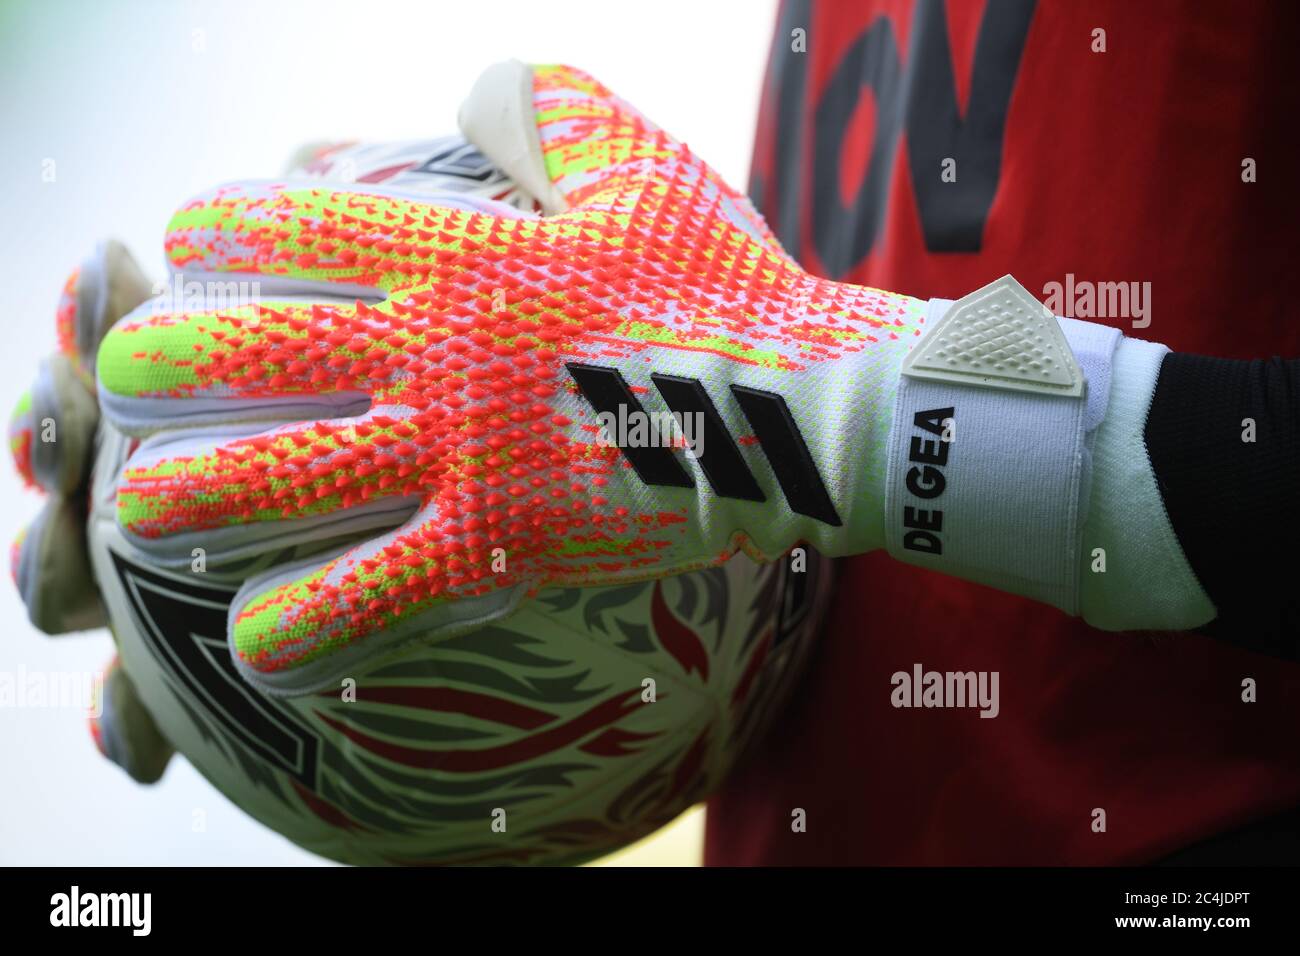 Close up detail on the goalkeeper gloves of Manchester United goalkeeper  David de Gea during the FA Cup quarter final match at Carrow Road, Norwich  Stock Photo - Alamy